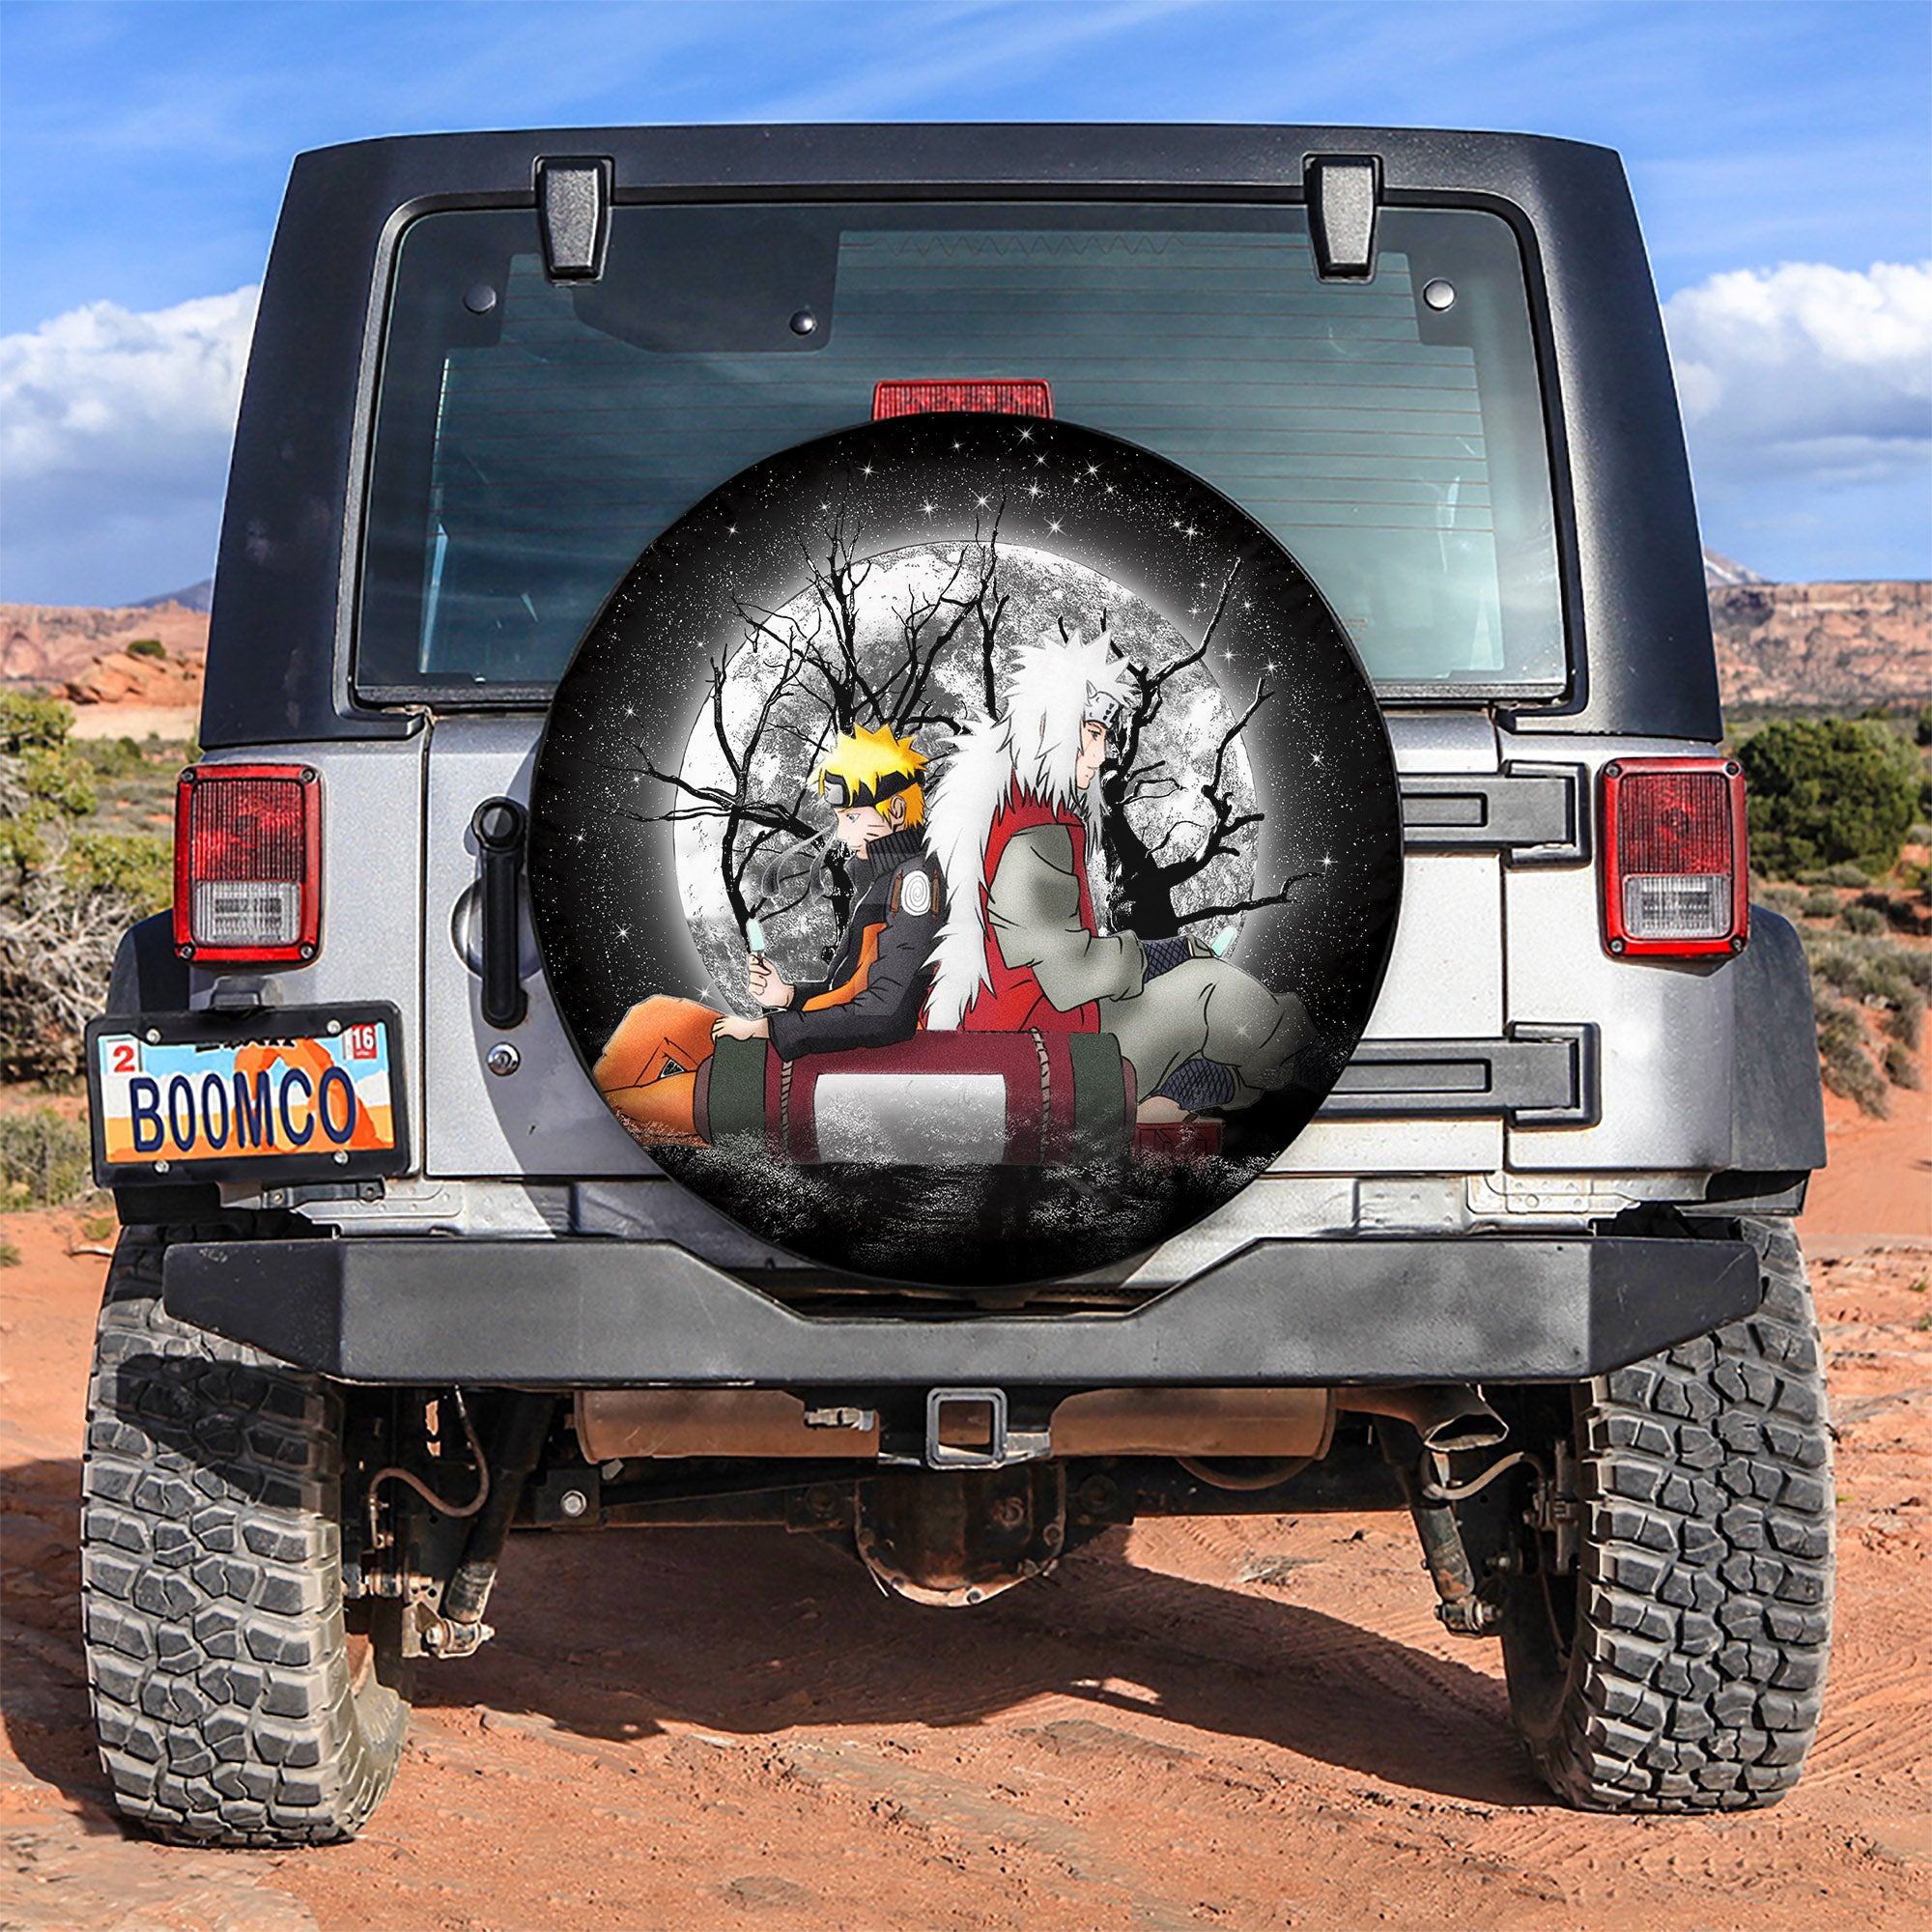 Jiraia Naruto Moonlight Spare Tire Cover Gift For Campers Nearkii